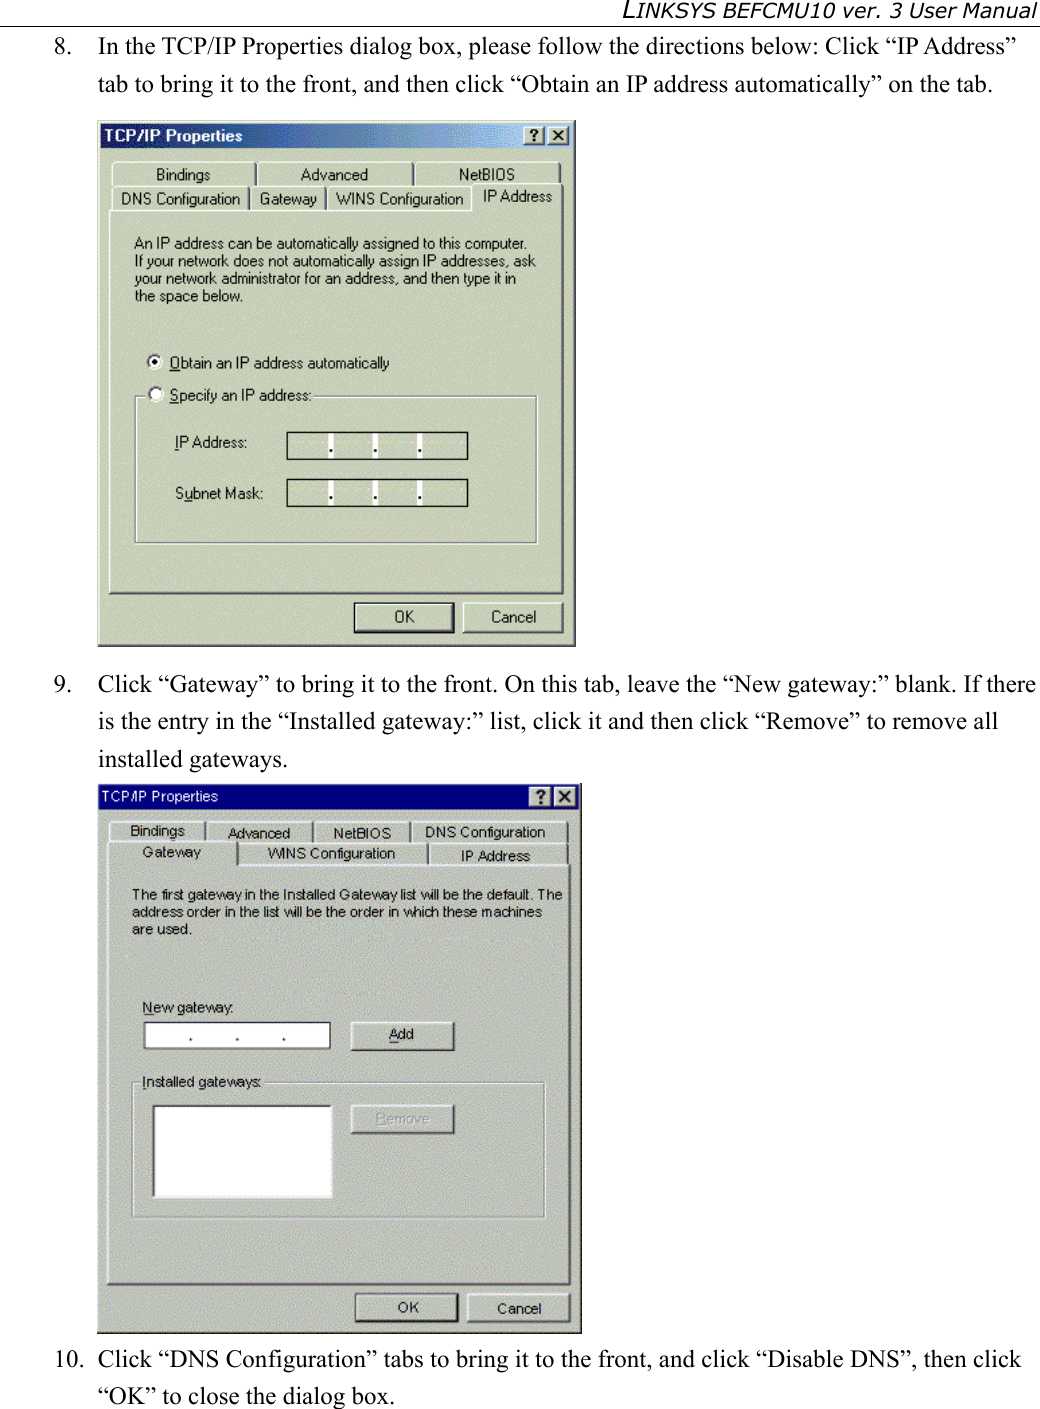 LINKSYS BEFCMU10 ver. 3 User Manual   8.  In the TCP/IP Properties dialog box, please follow the directions below: Click “IP Address” tab to bring it to the front, and then click “Obtain an IP address automatically” on the tab.  9.  Click “Gateway” to bring it to the front. On this tab, leave the “New gateway:” blank. If there is the entry in the “Installed gateway:” list, click it and then click “Remove” to remove all installed gateways.  10.  Click “DNS Configuration” tabs to bring it to the front, and click “Disable DNS”, then click “OK” to close the dialog box. 